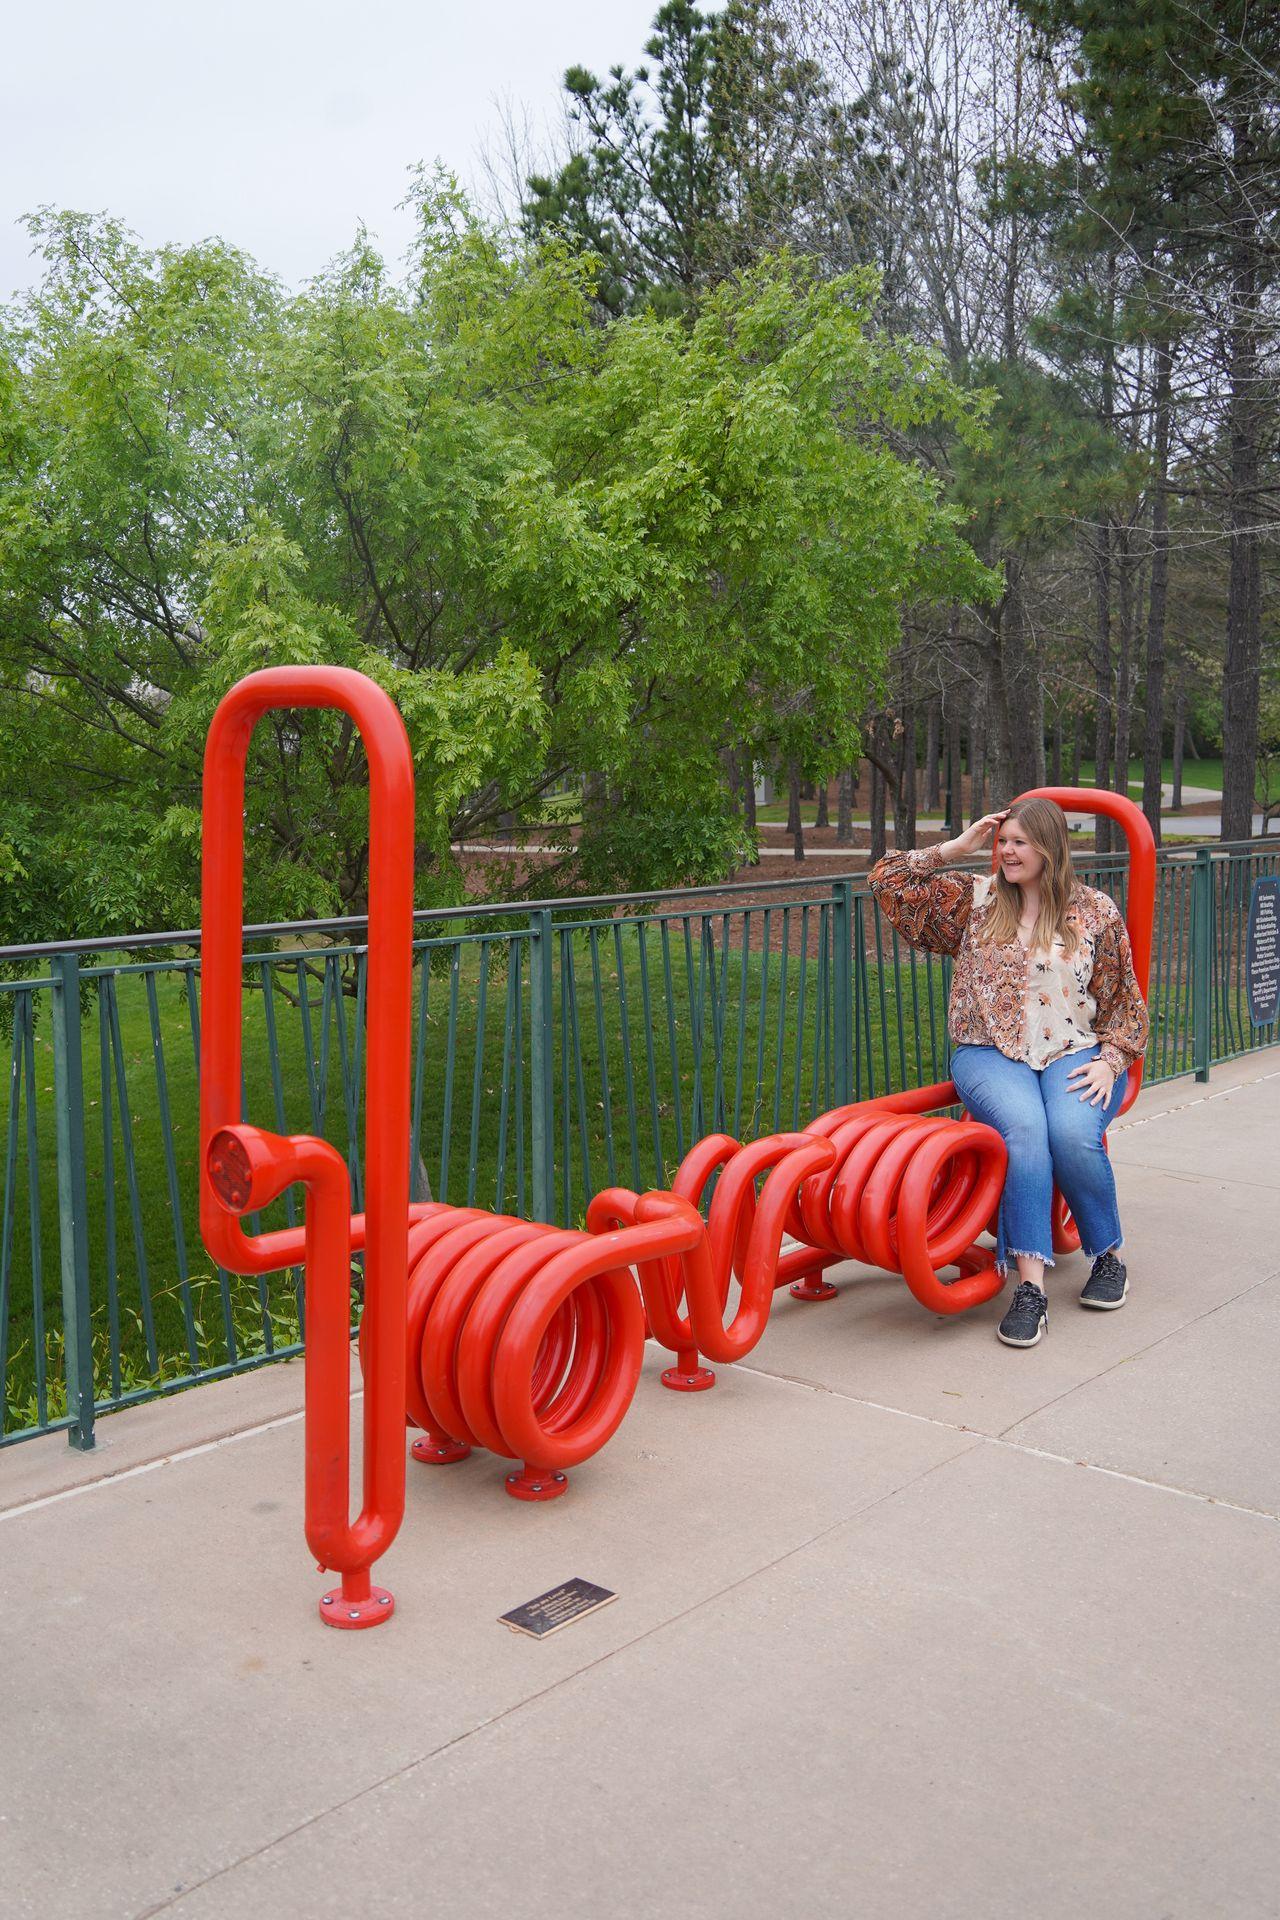 Lydia sitting on a red bench that spells 'love' using various tubes